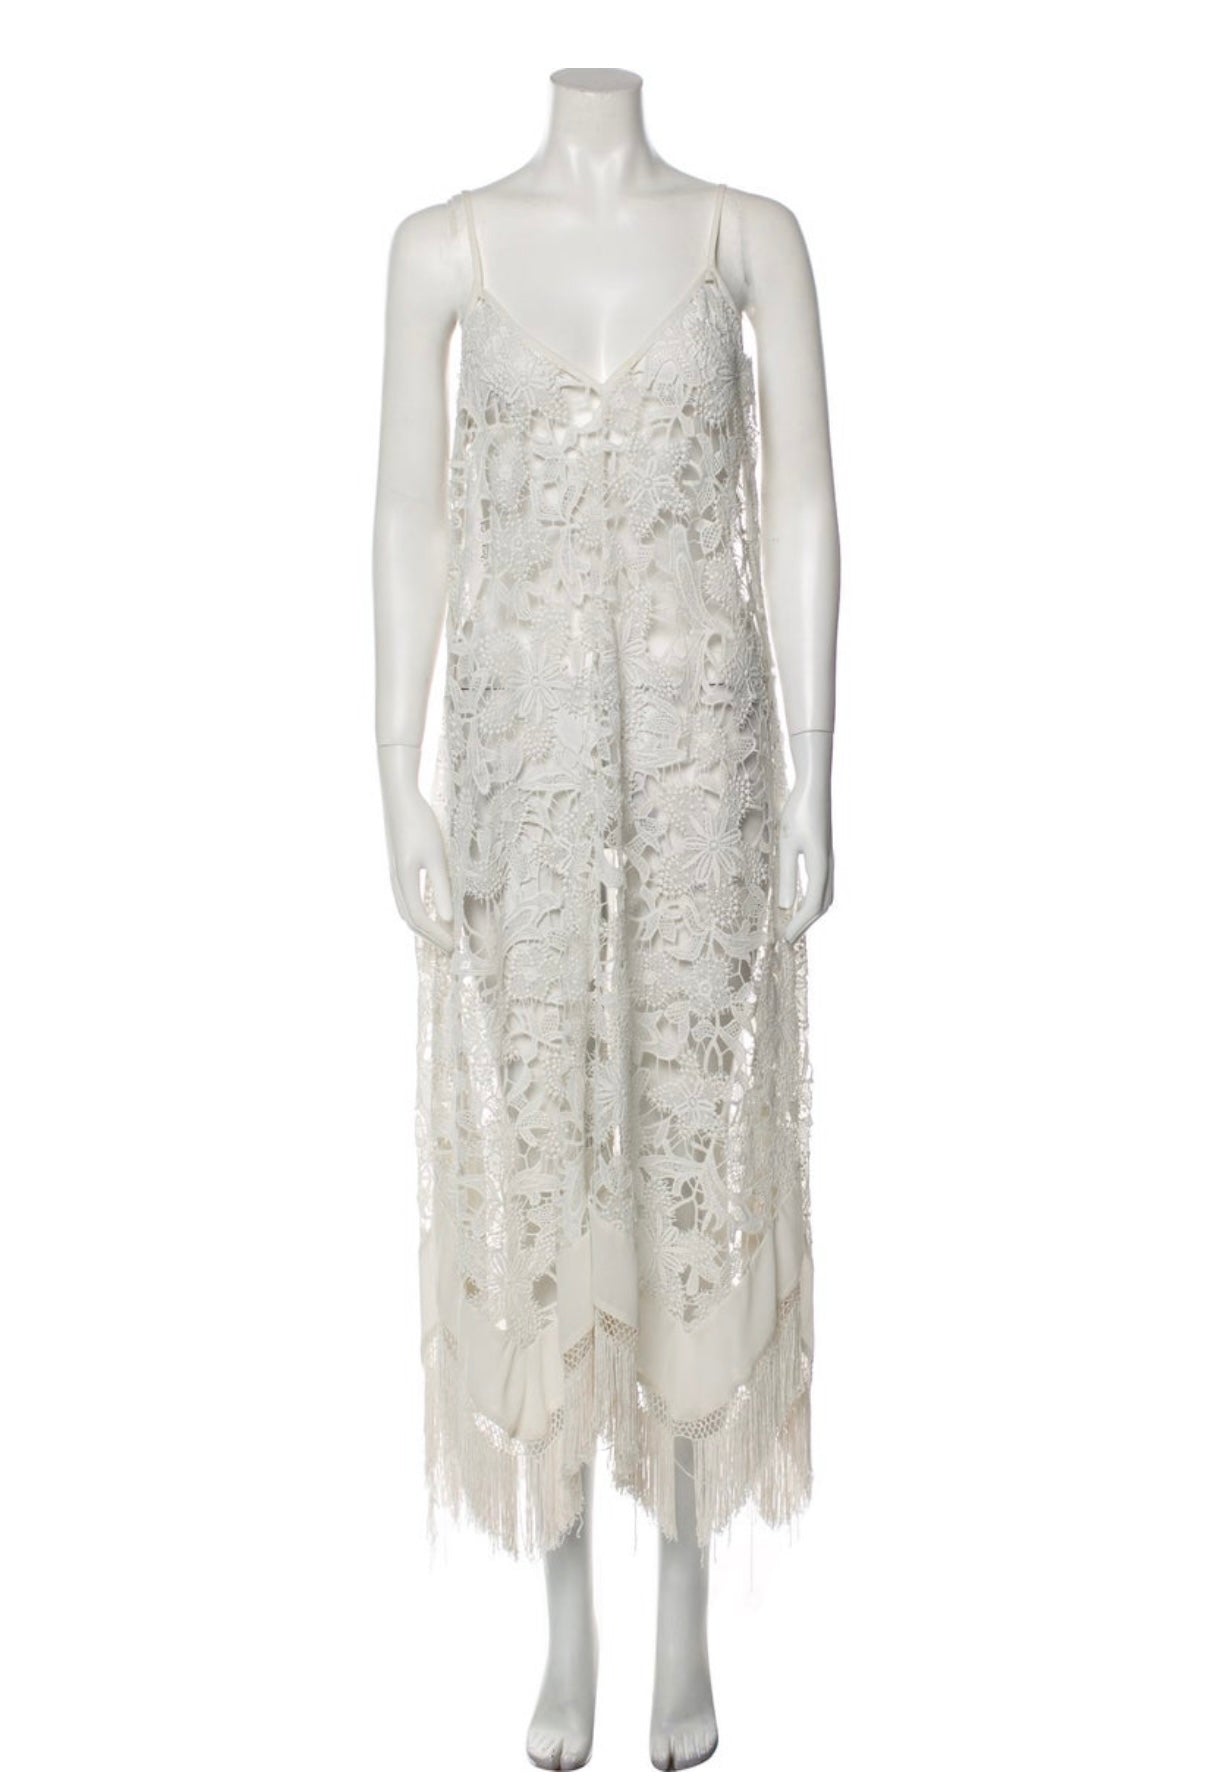 Ramy Brook - Trim lace & fringe accent cover-up dress